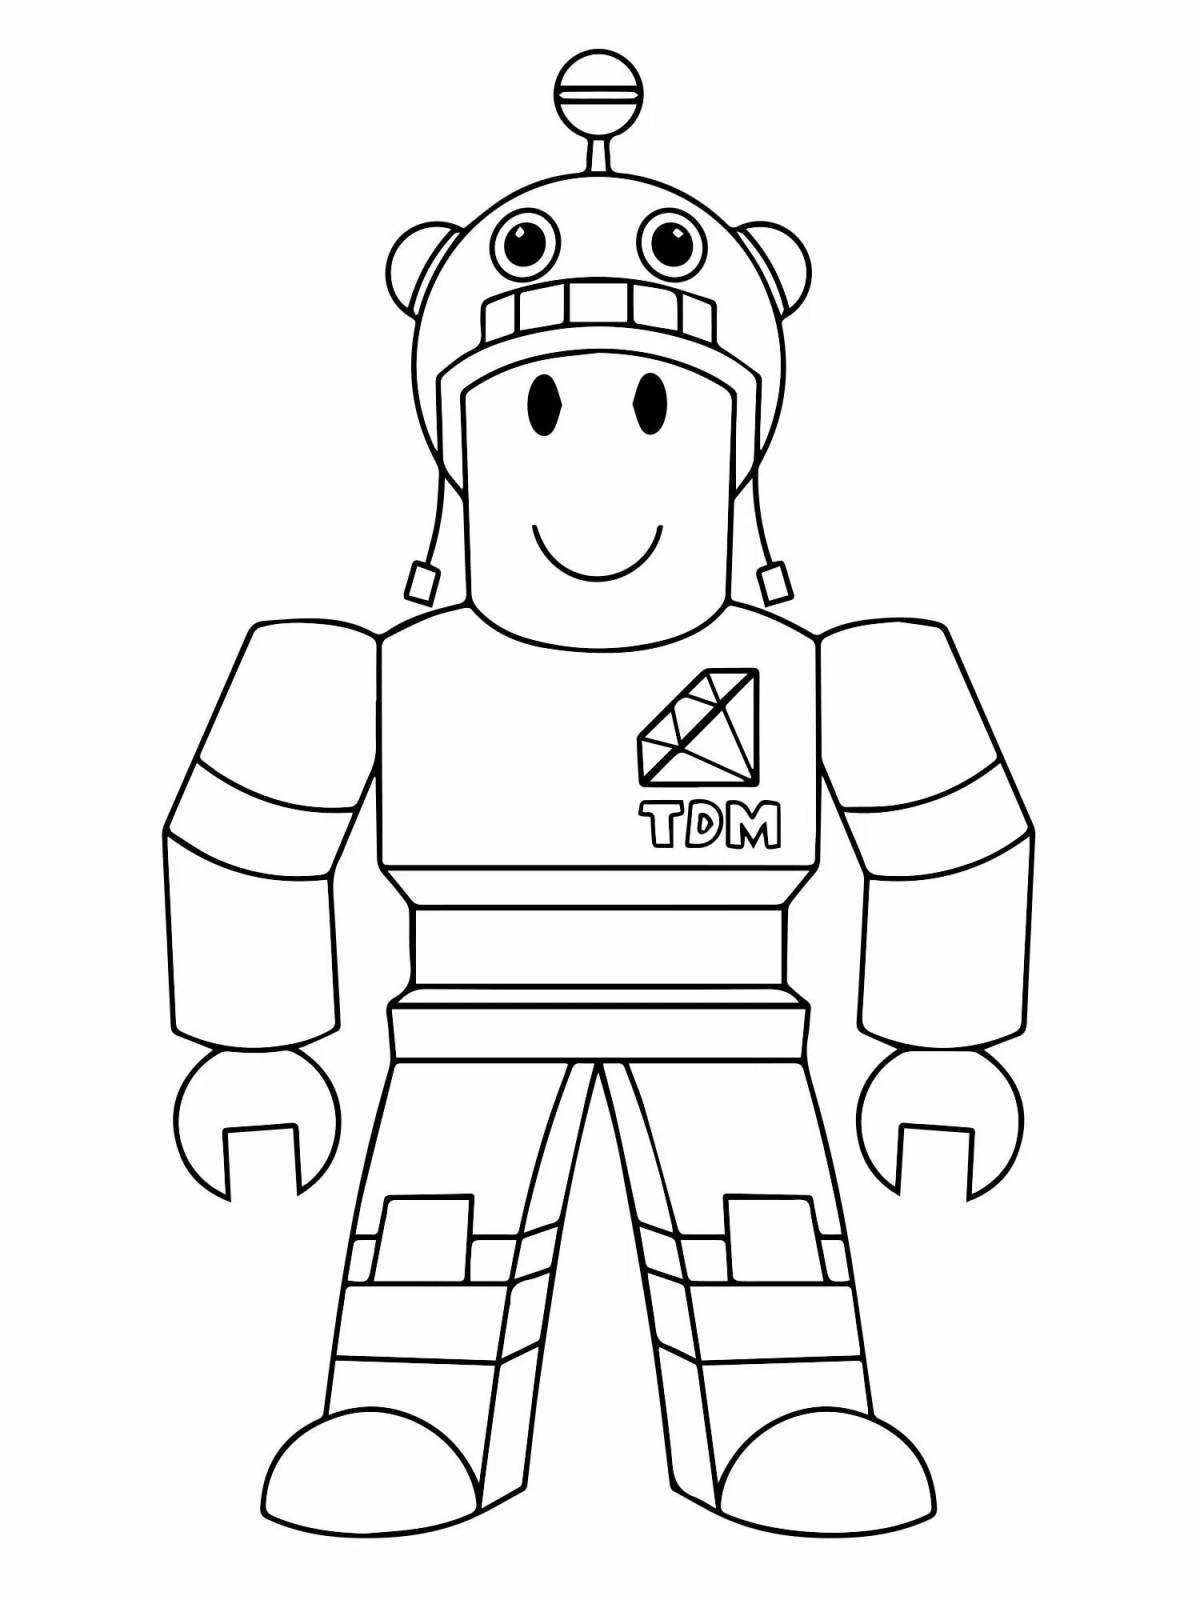 Robloxers colorful coloring book